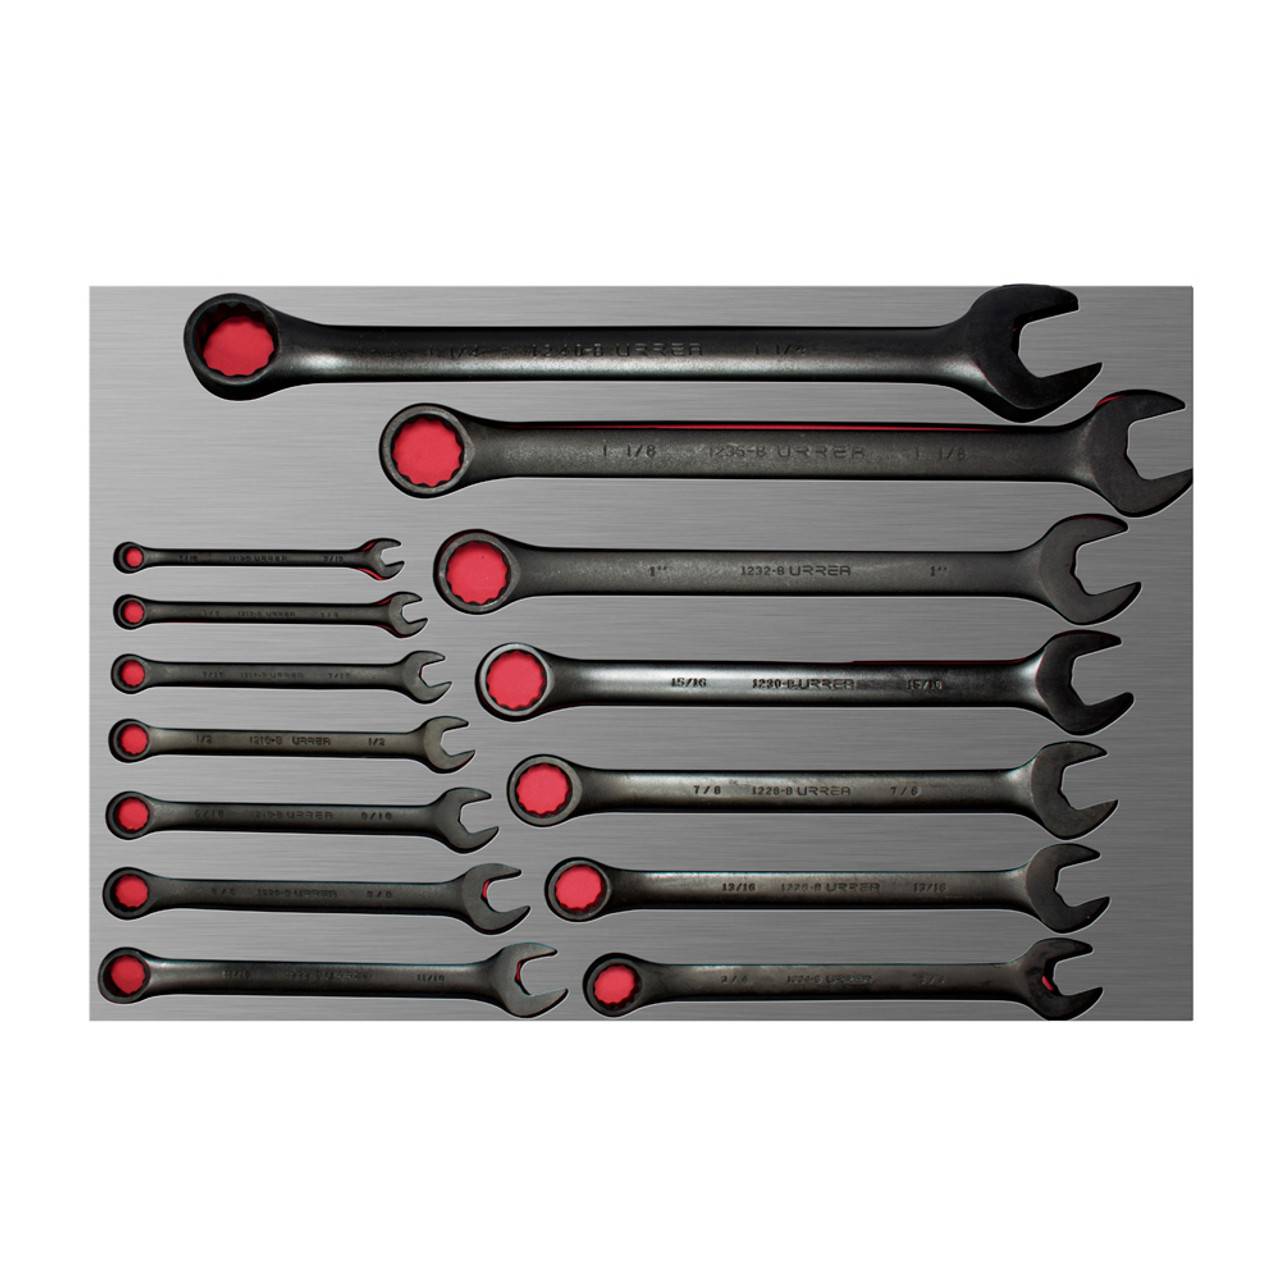 URREA 14 pc COMBINATION WRENCH SETS WITH LAMINATED PLASTIC COVER #CH305L